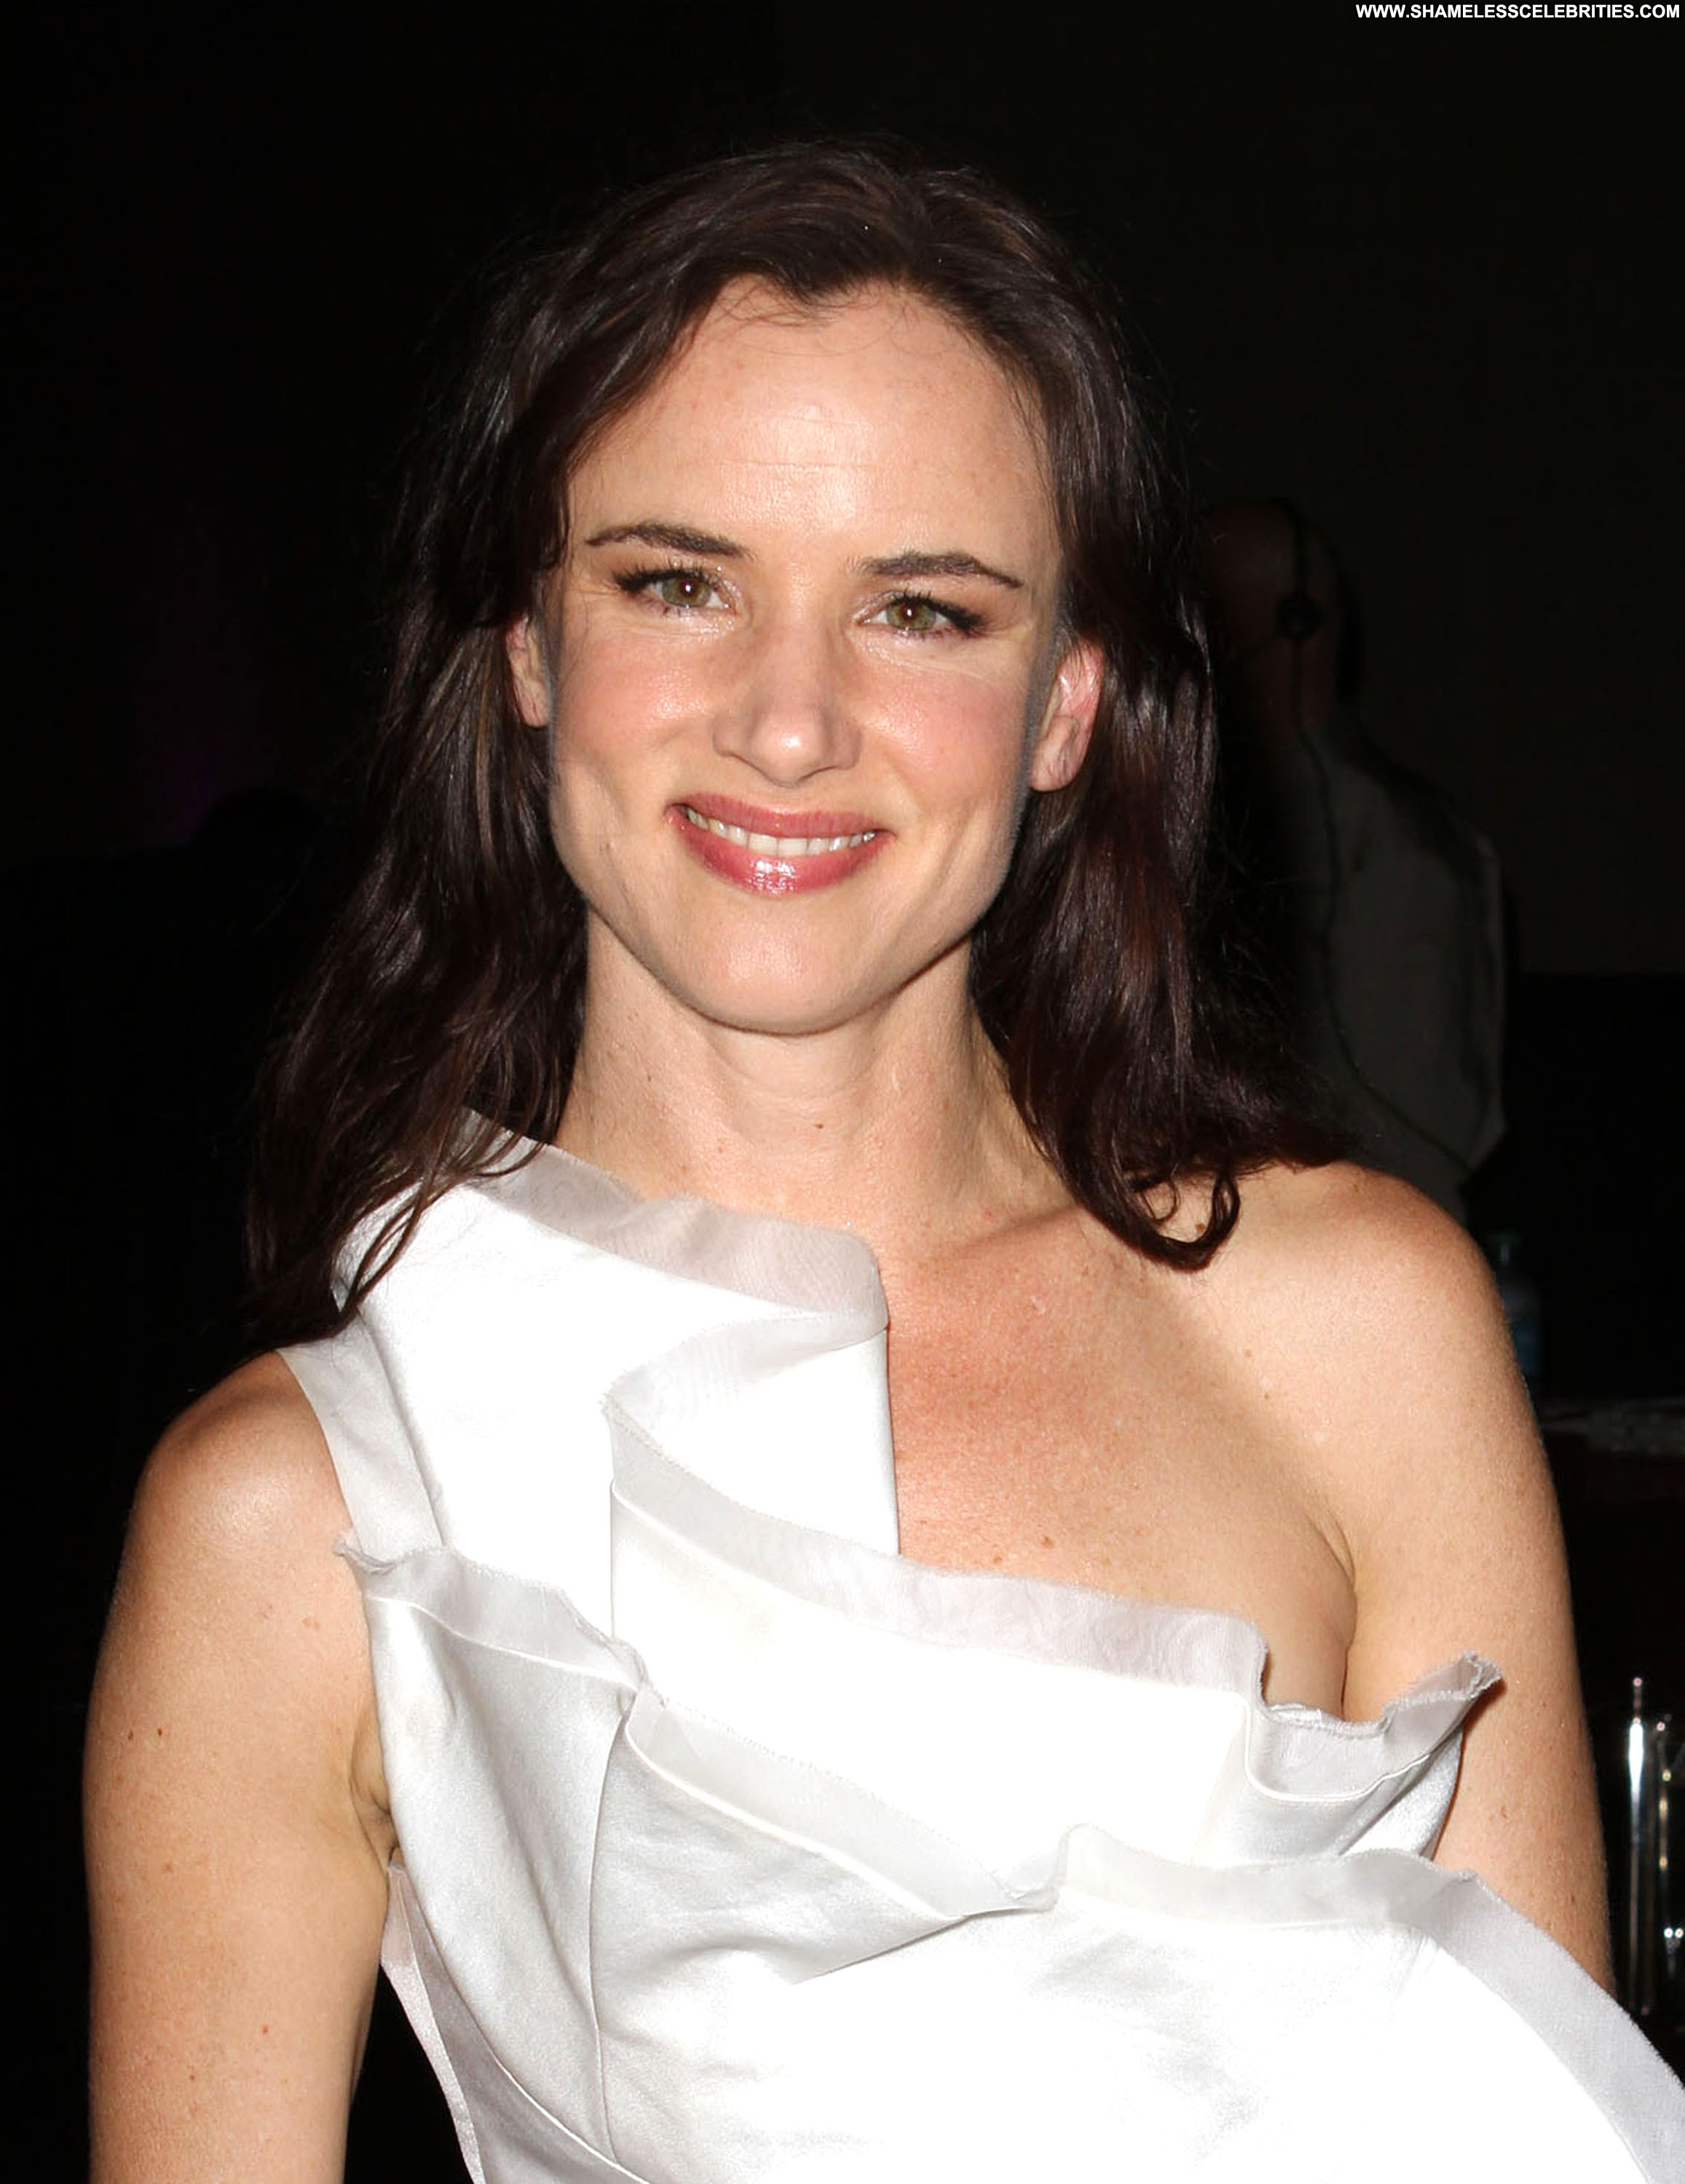 Hot juliette lewis Updated: Who